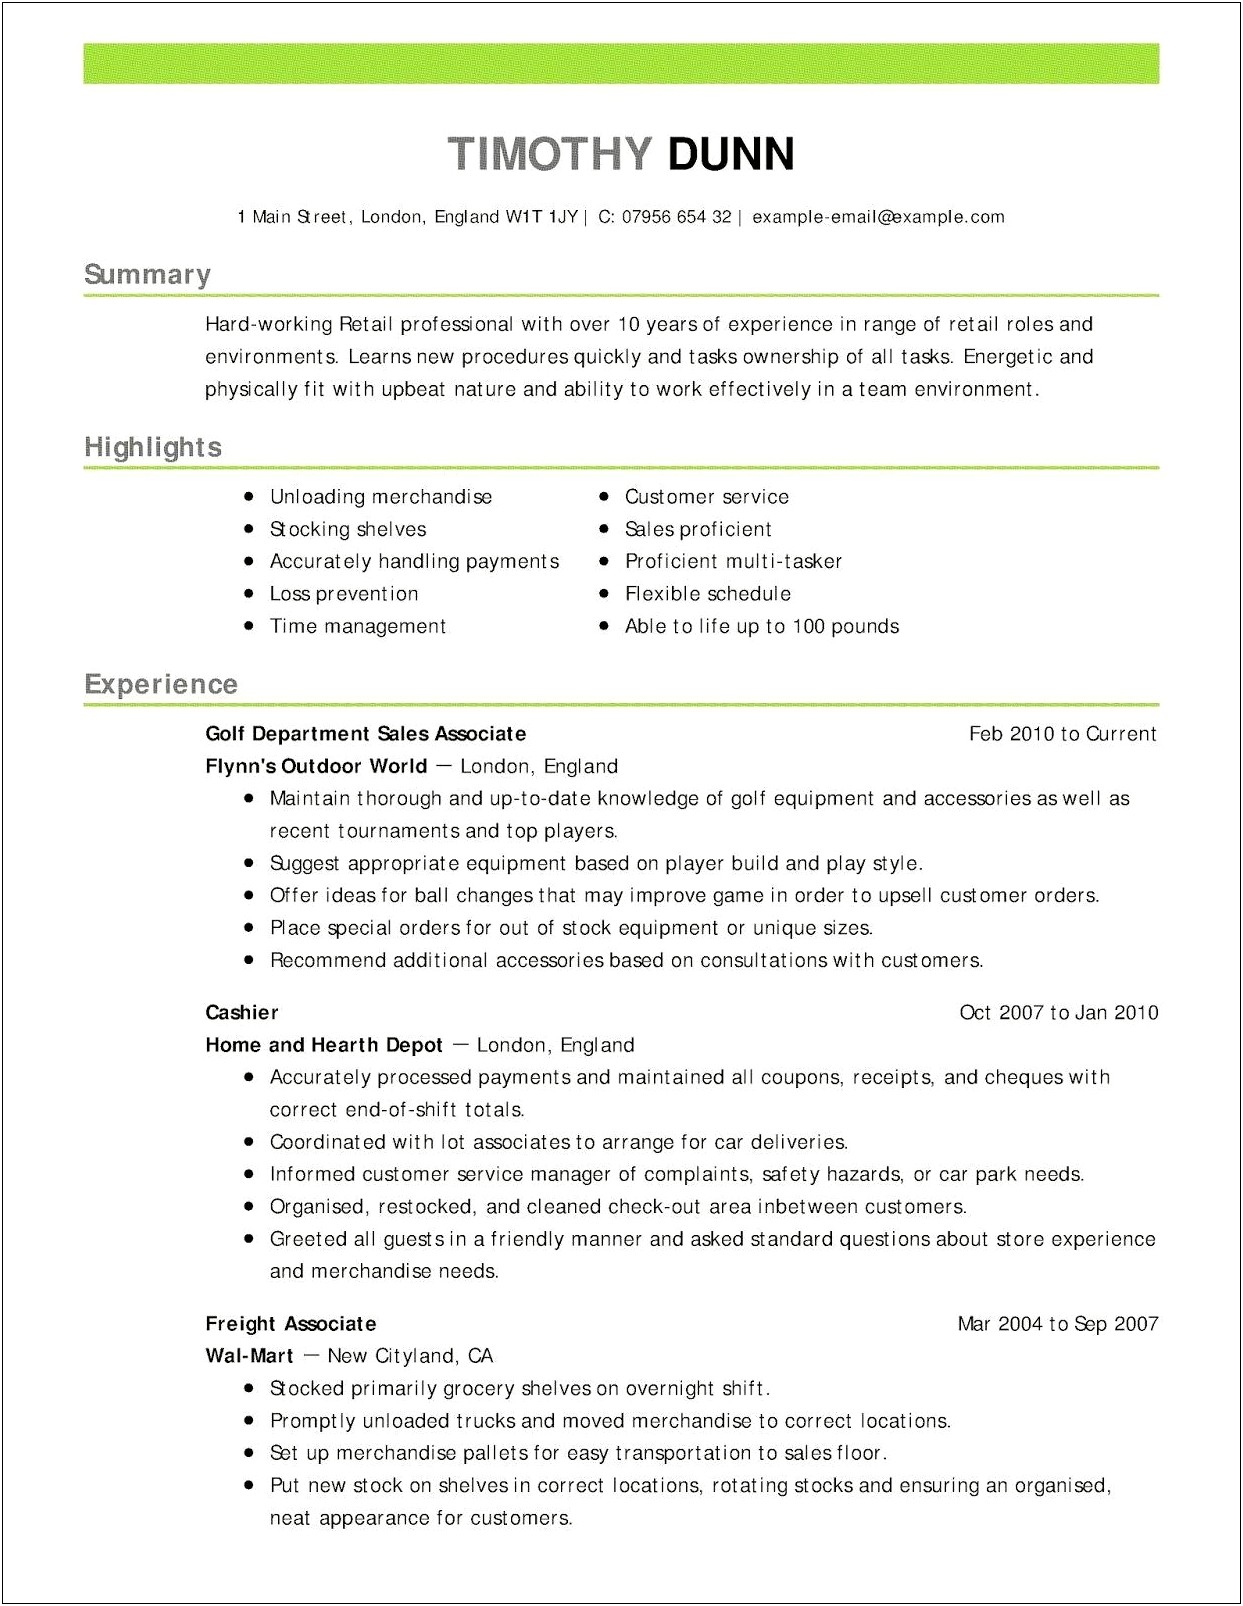 Resume Summary Examples Food Service Manager